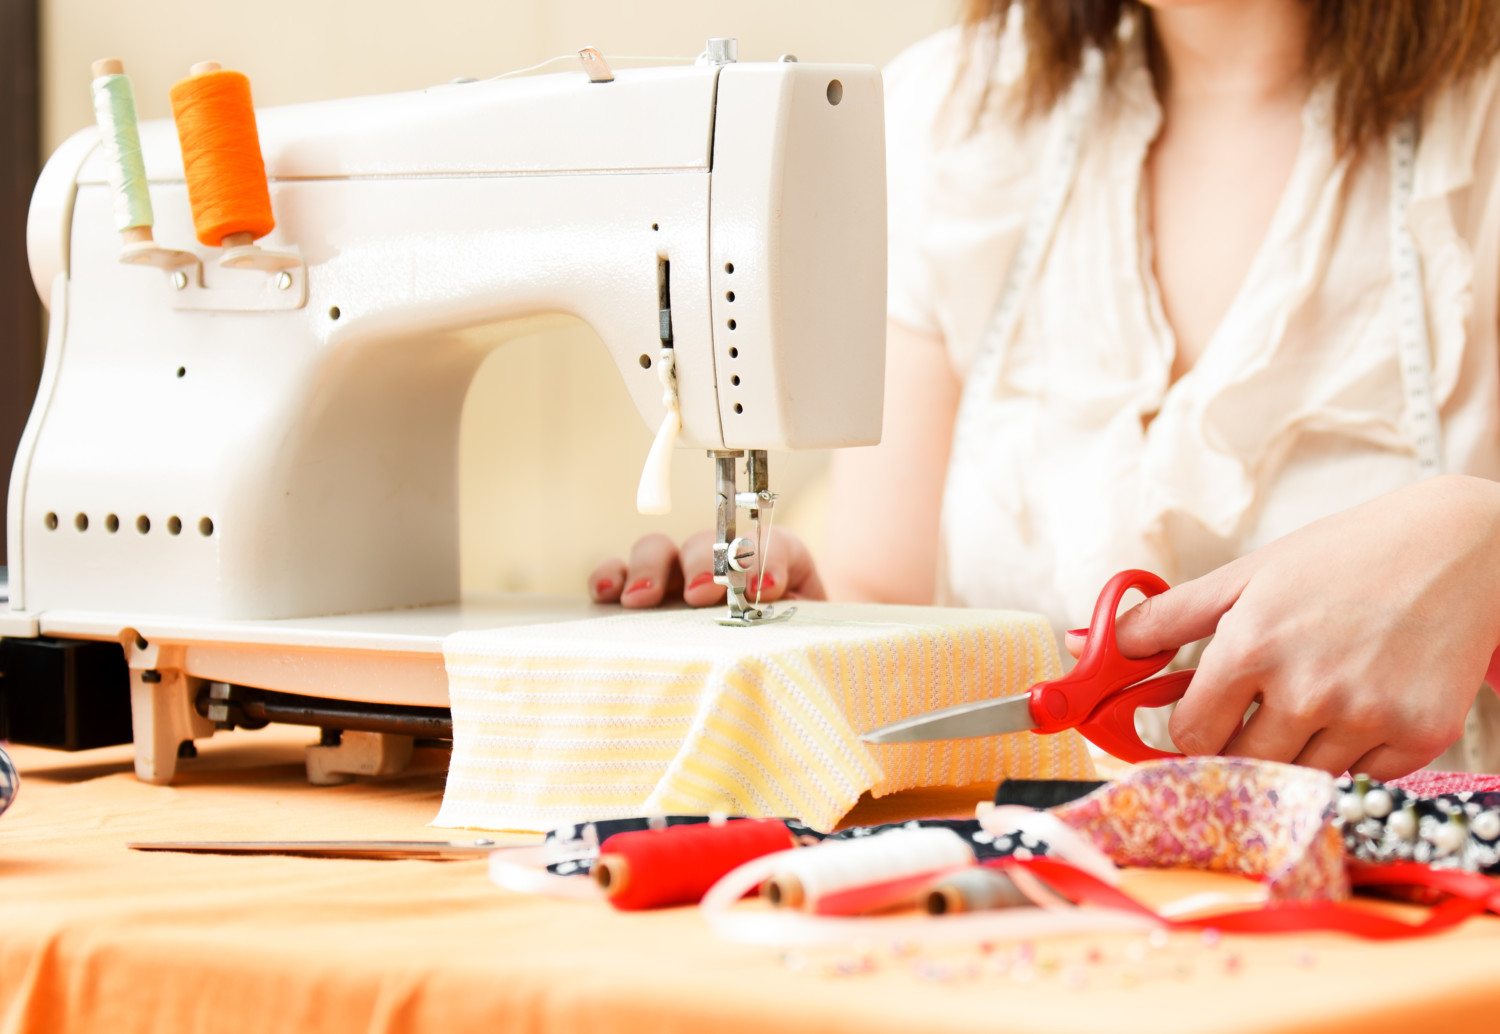 Here's everything you need to start a sewing hobby